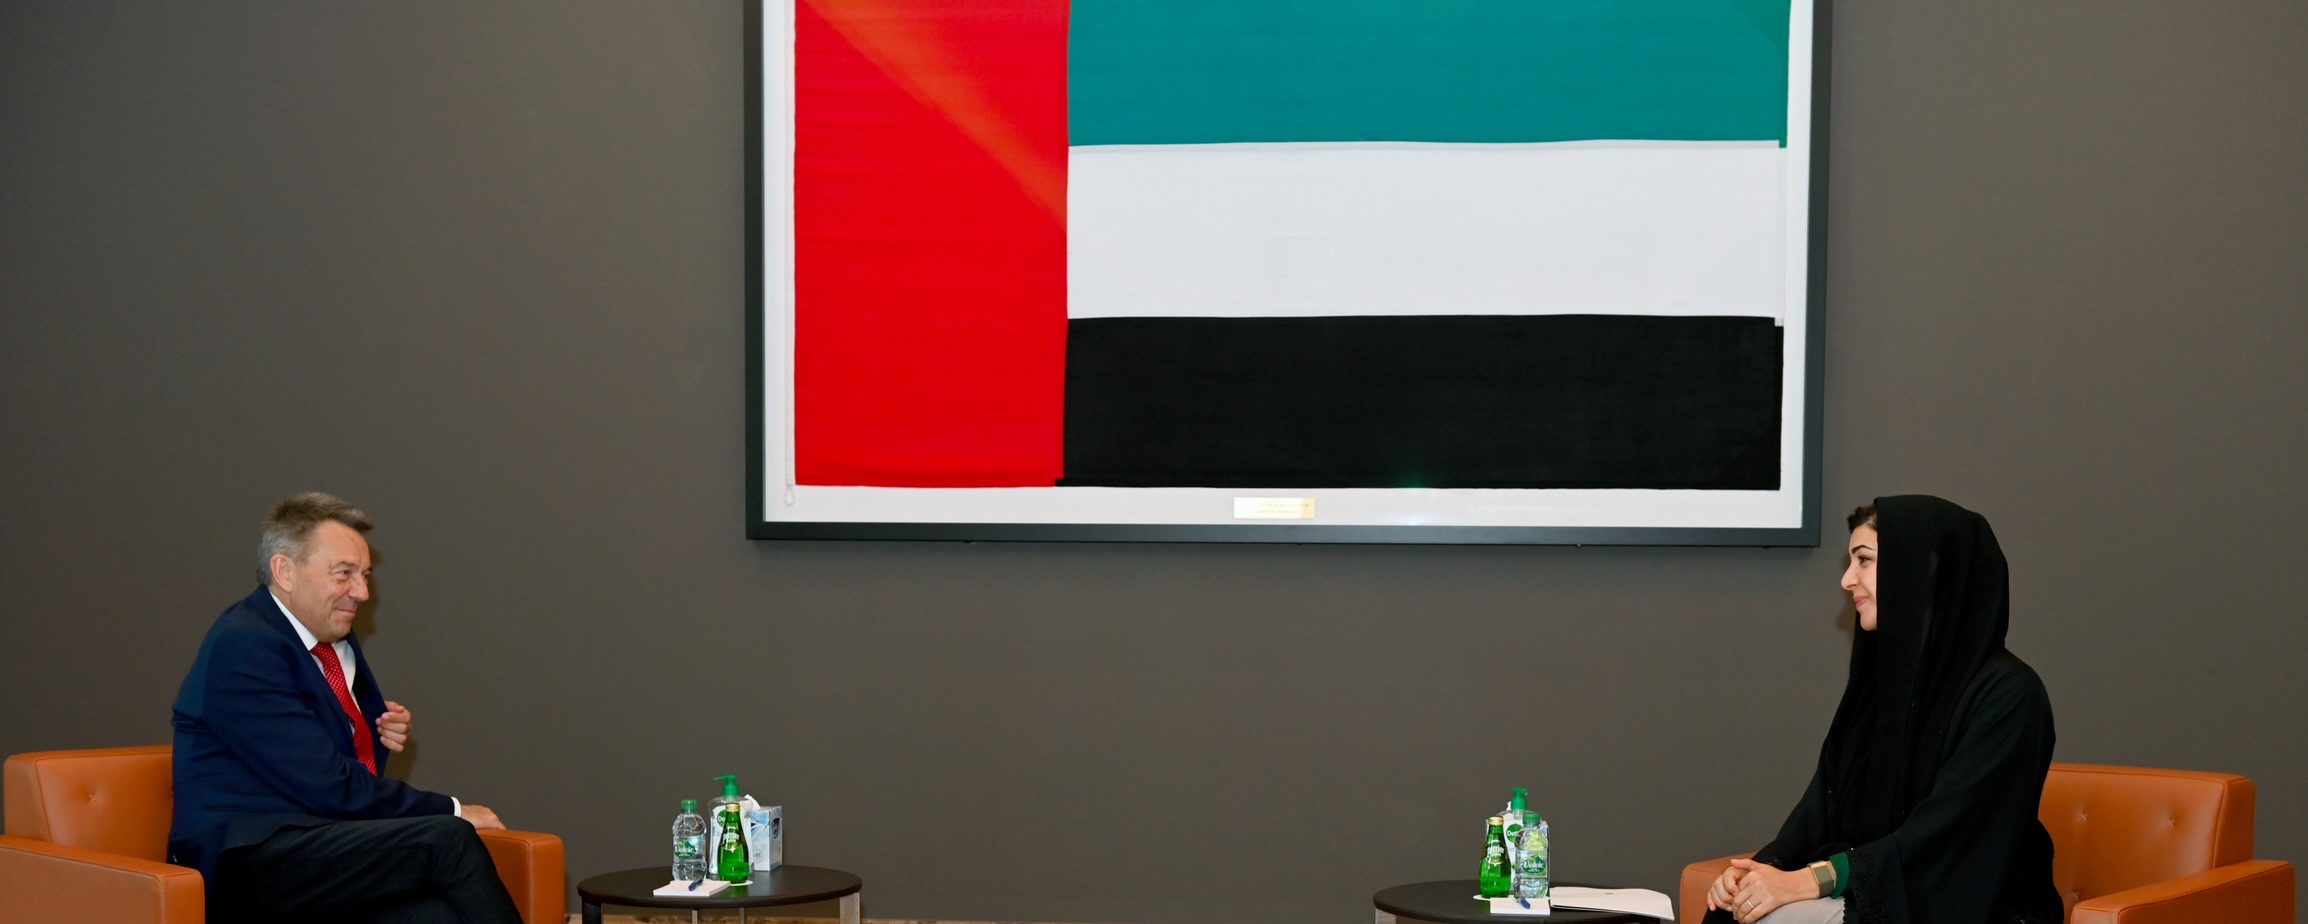 The United Arab Emirates and the International Committee of the Red Cross signed an agreement to establish an office for the Committee in the country.